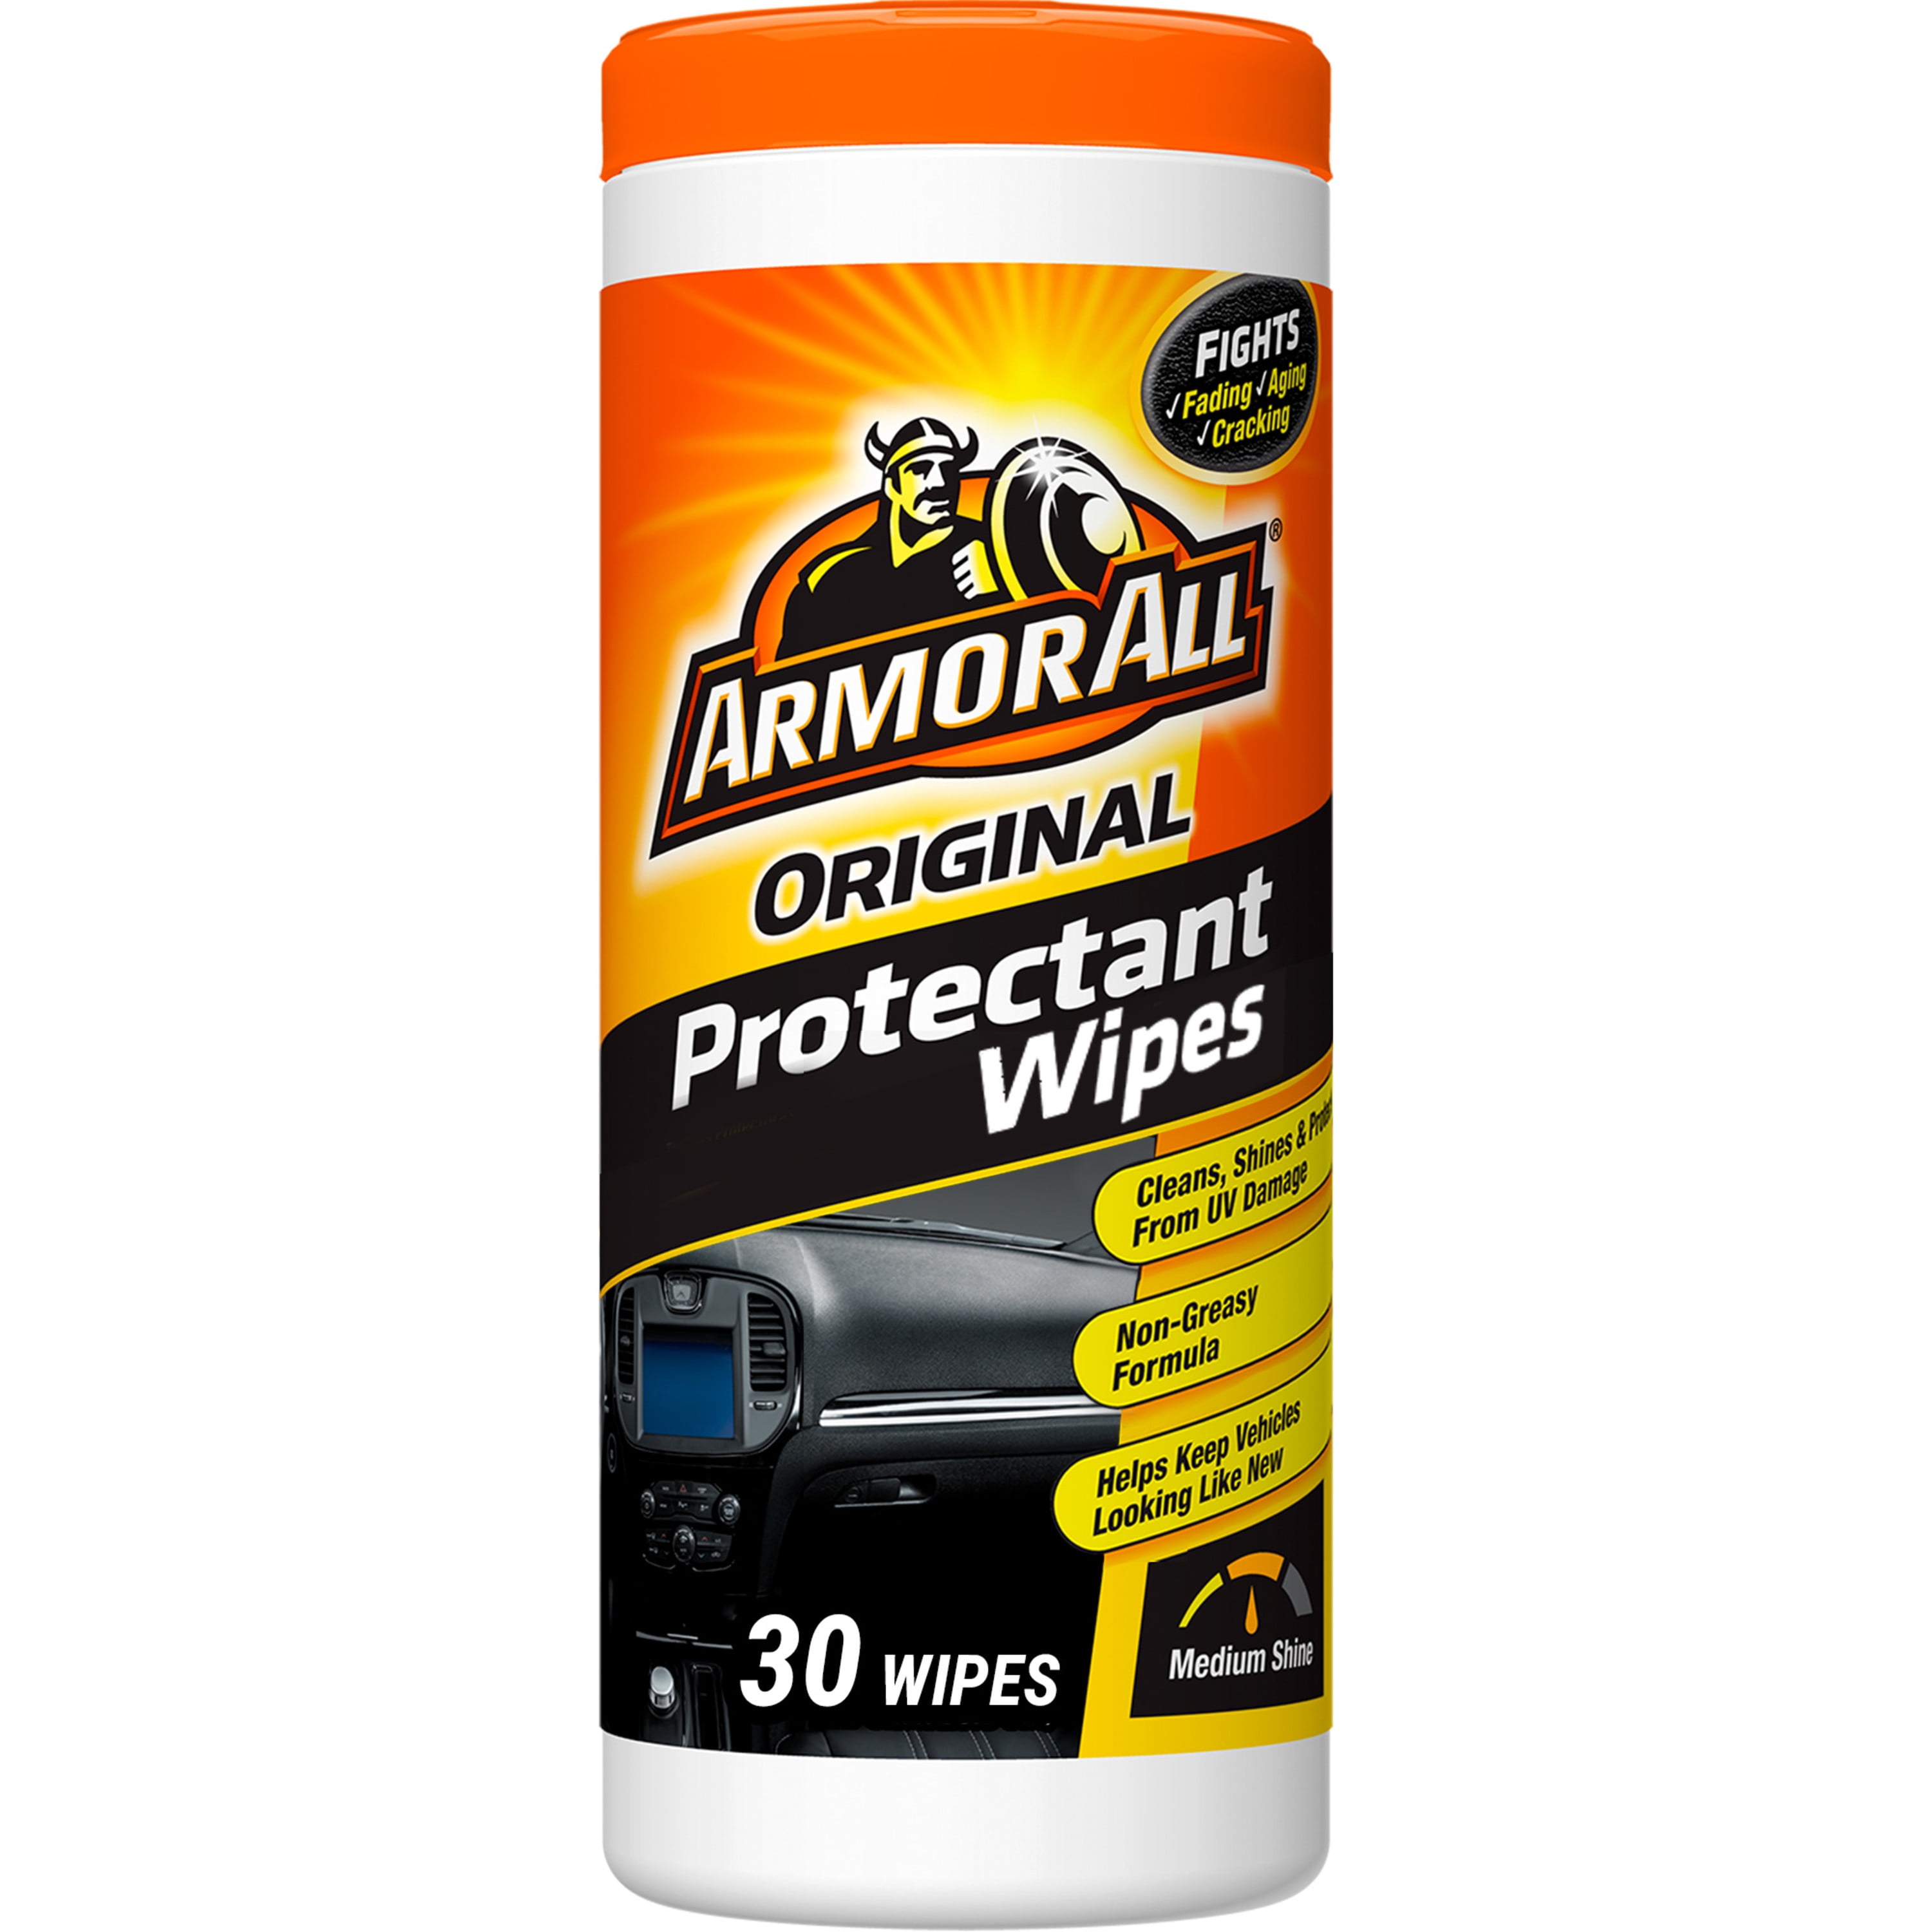 Save up to 30% on Armor All car care products thanks to this